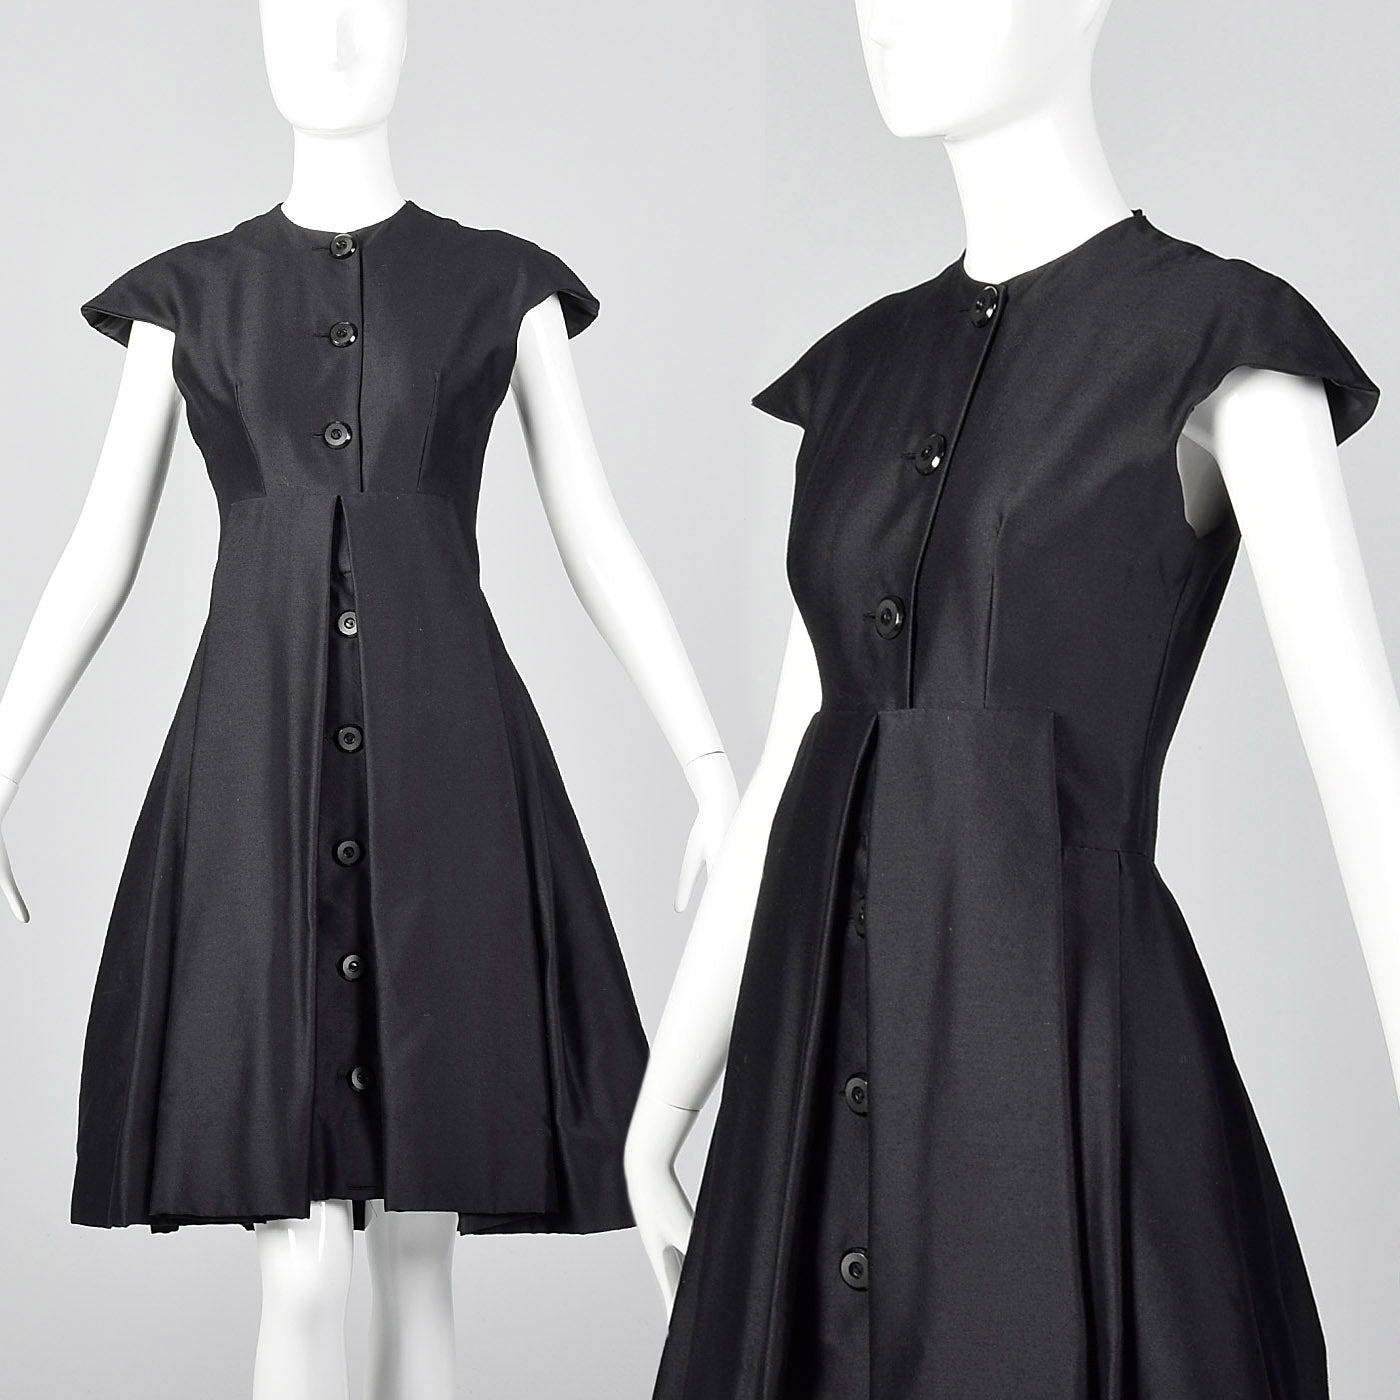 1960s Suzy Perette Black Dress with Pleated Skirt